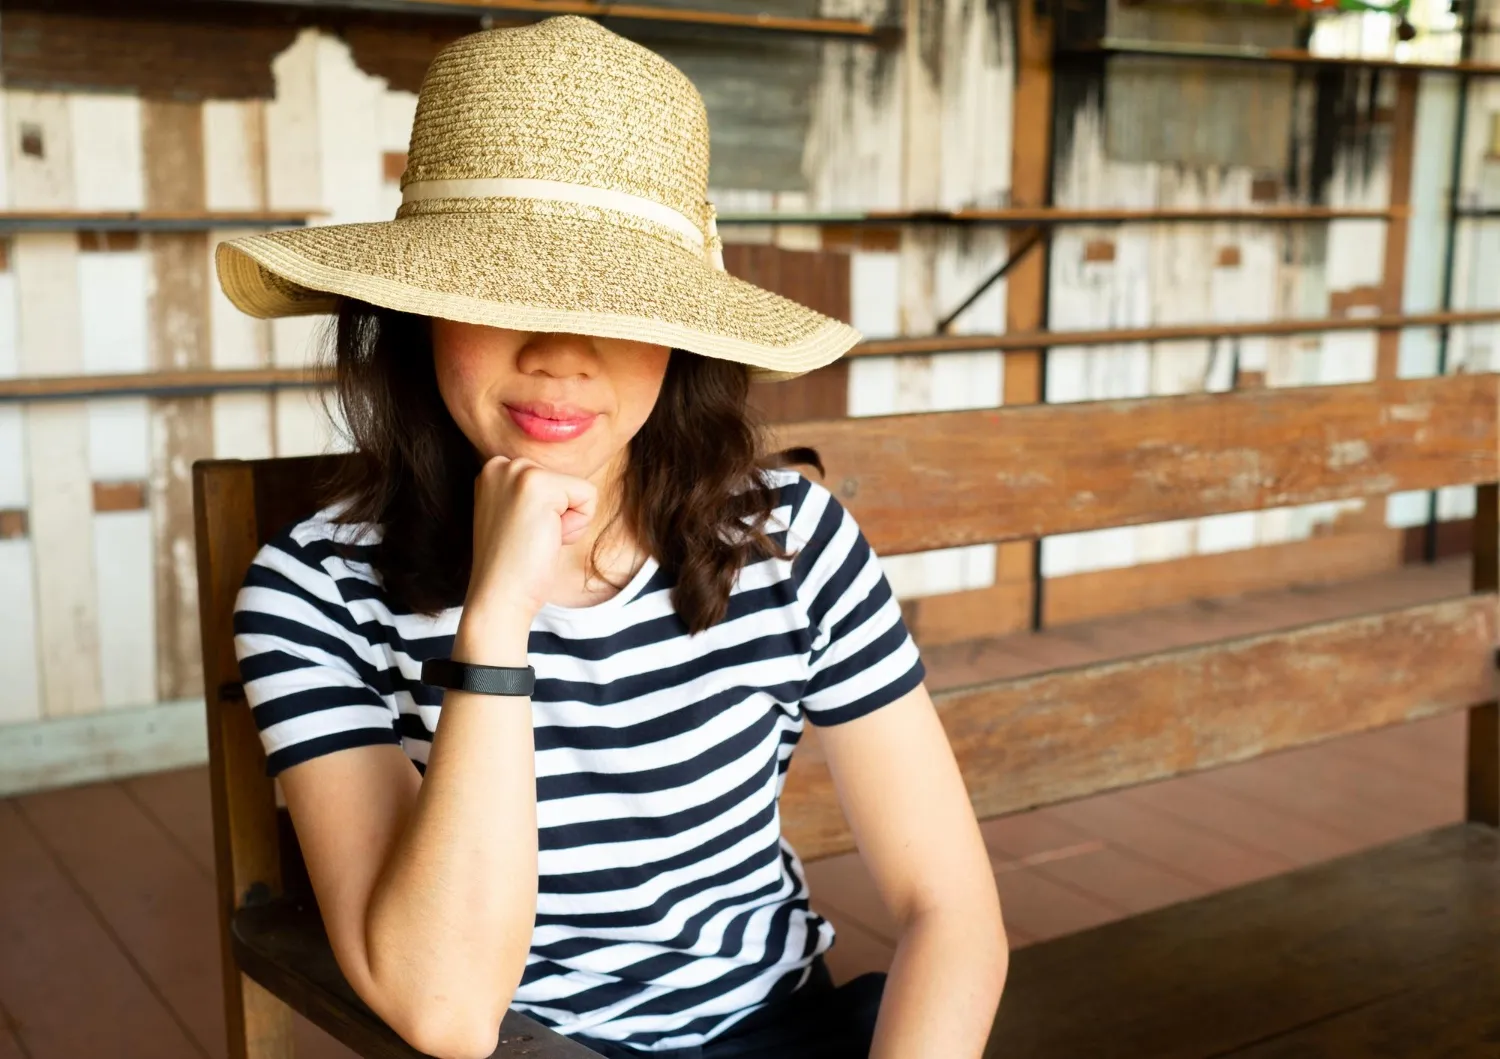 Smiling woman with hat sitting on wooden bench